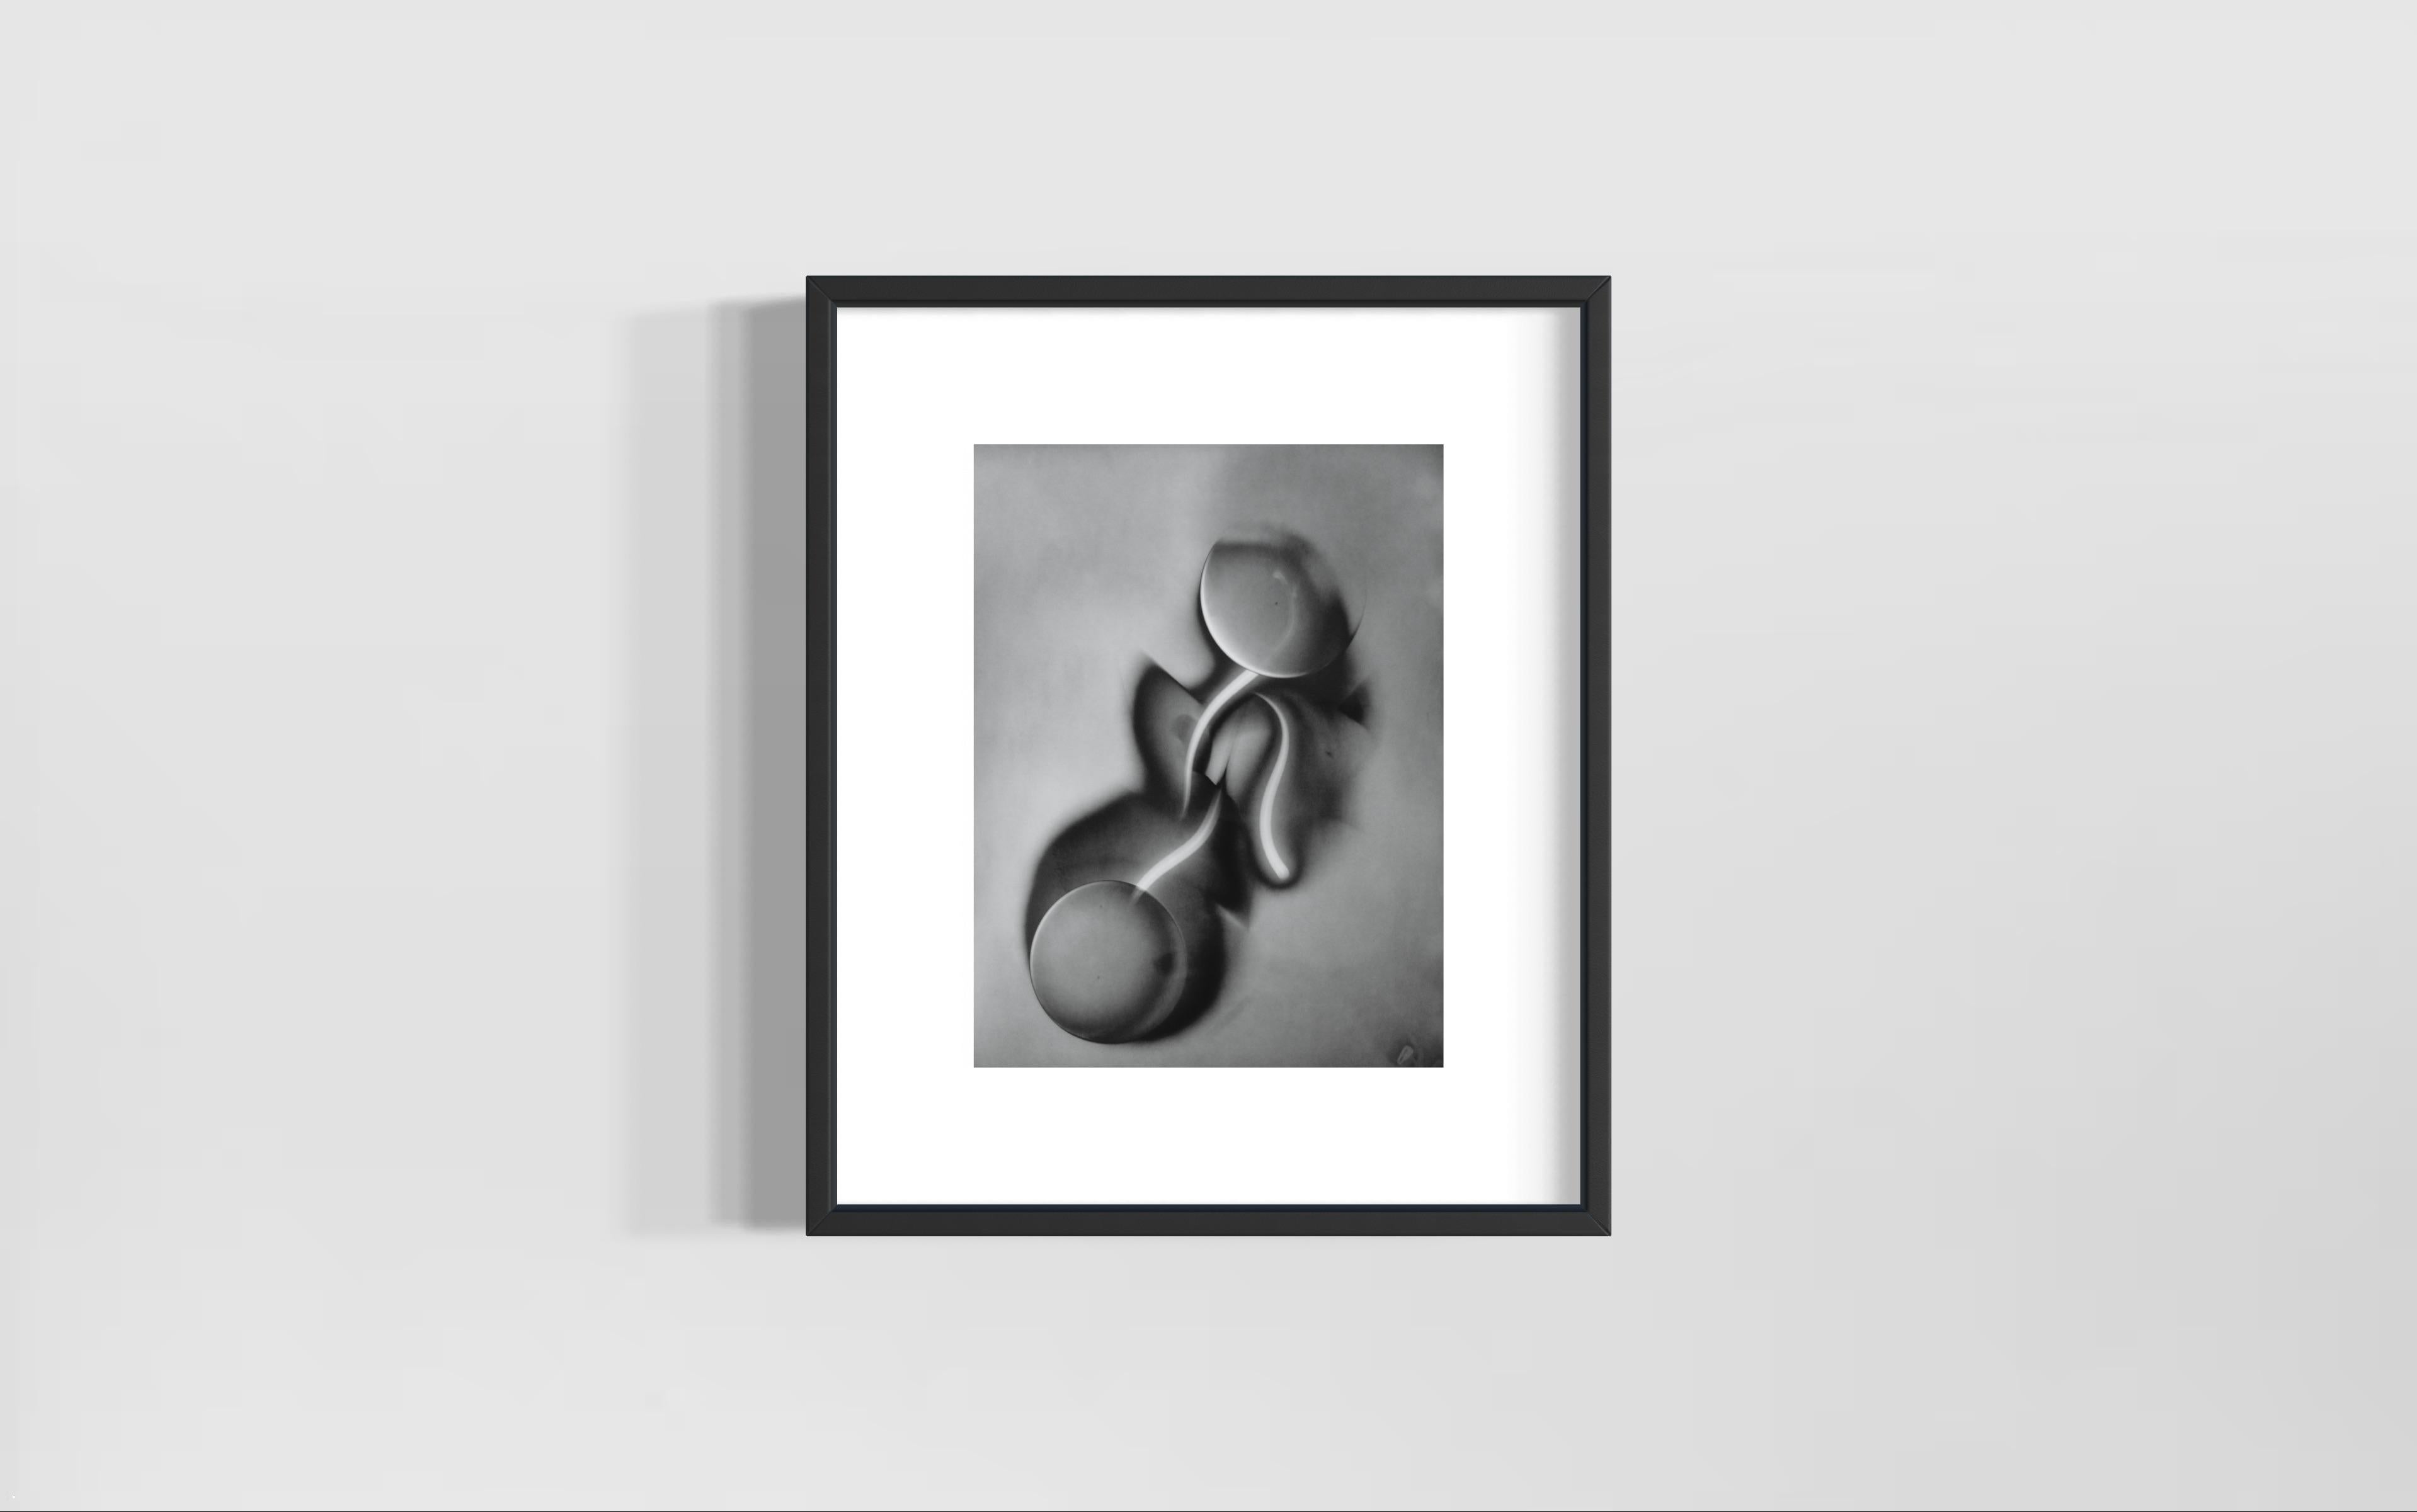 #396, 2016
Silver Gelatin Luminogram Print, Framed (classic museum style white book mount board and black frame)
Image size: 40.6 x 30.5 cm
Framed: 58 x 49 cm
Unique
Series: The Self Representation of Light
Signed and dated in pen on verso
© Michael